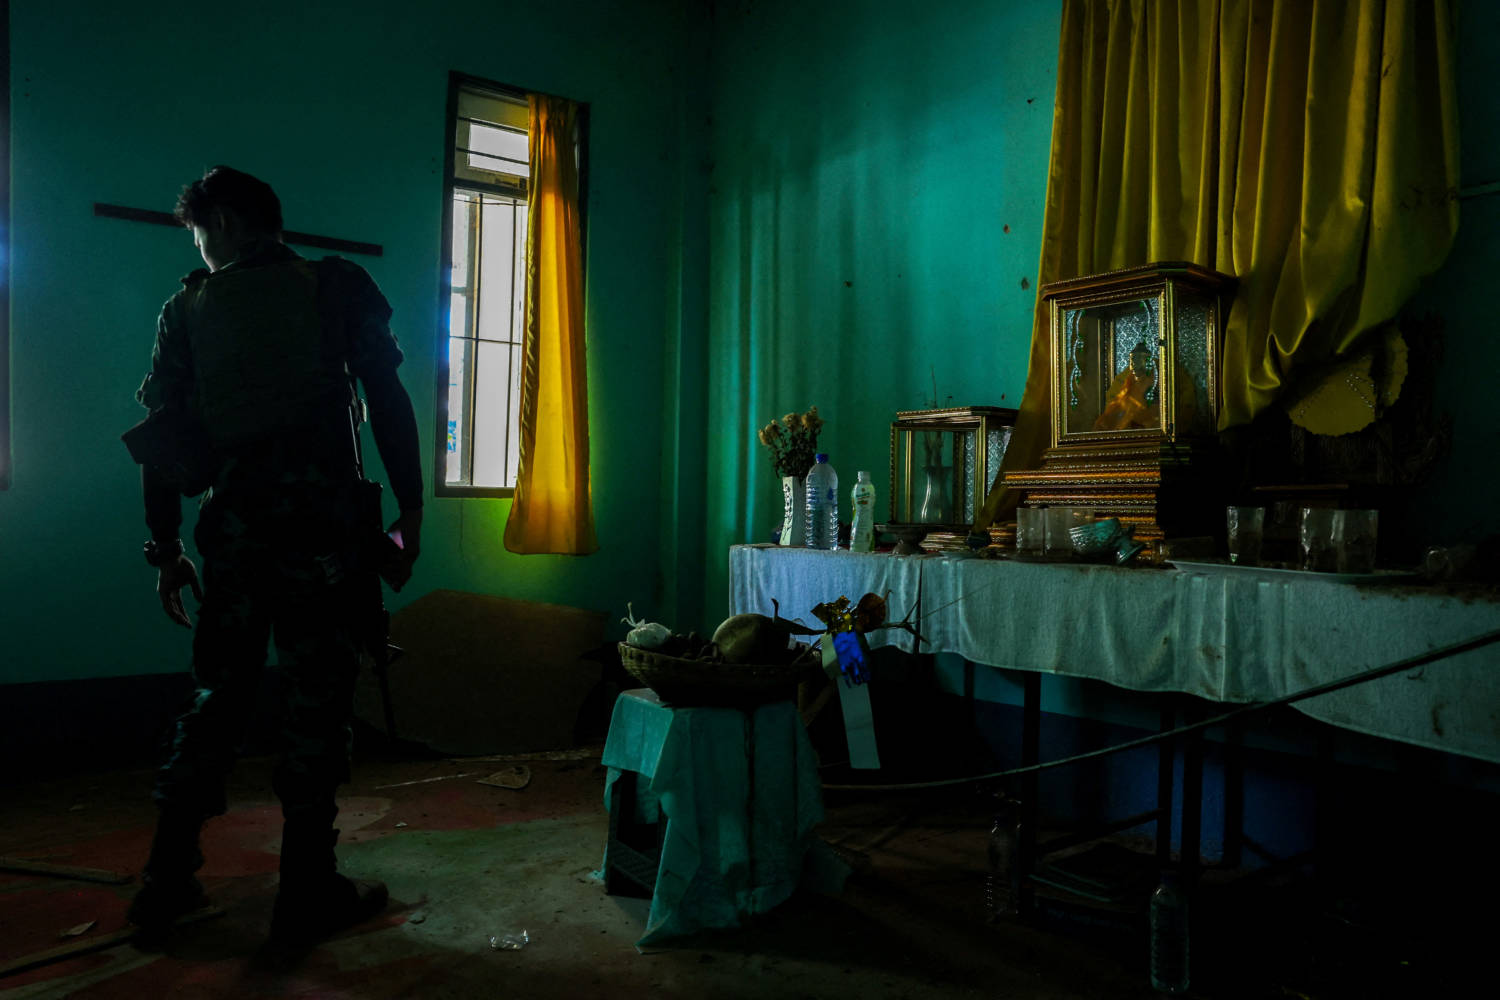 A Soldier From The Karen National Liberation Army (knla) Inspects Inside A High Rank Myanmar Soldier House At A Myanmar Military Base At Thingyan Nyi Naung Village On The Outskirts Of Myawaddy